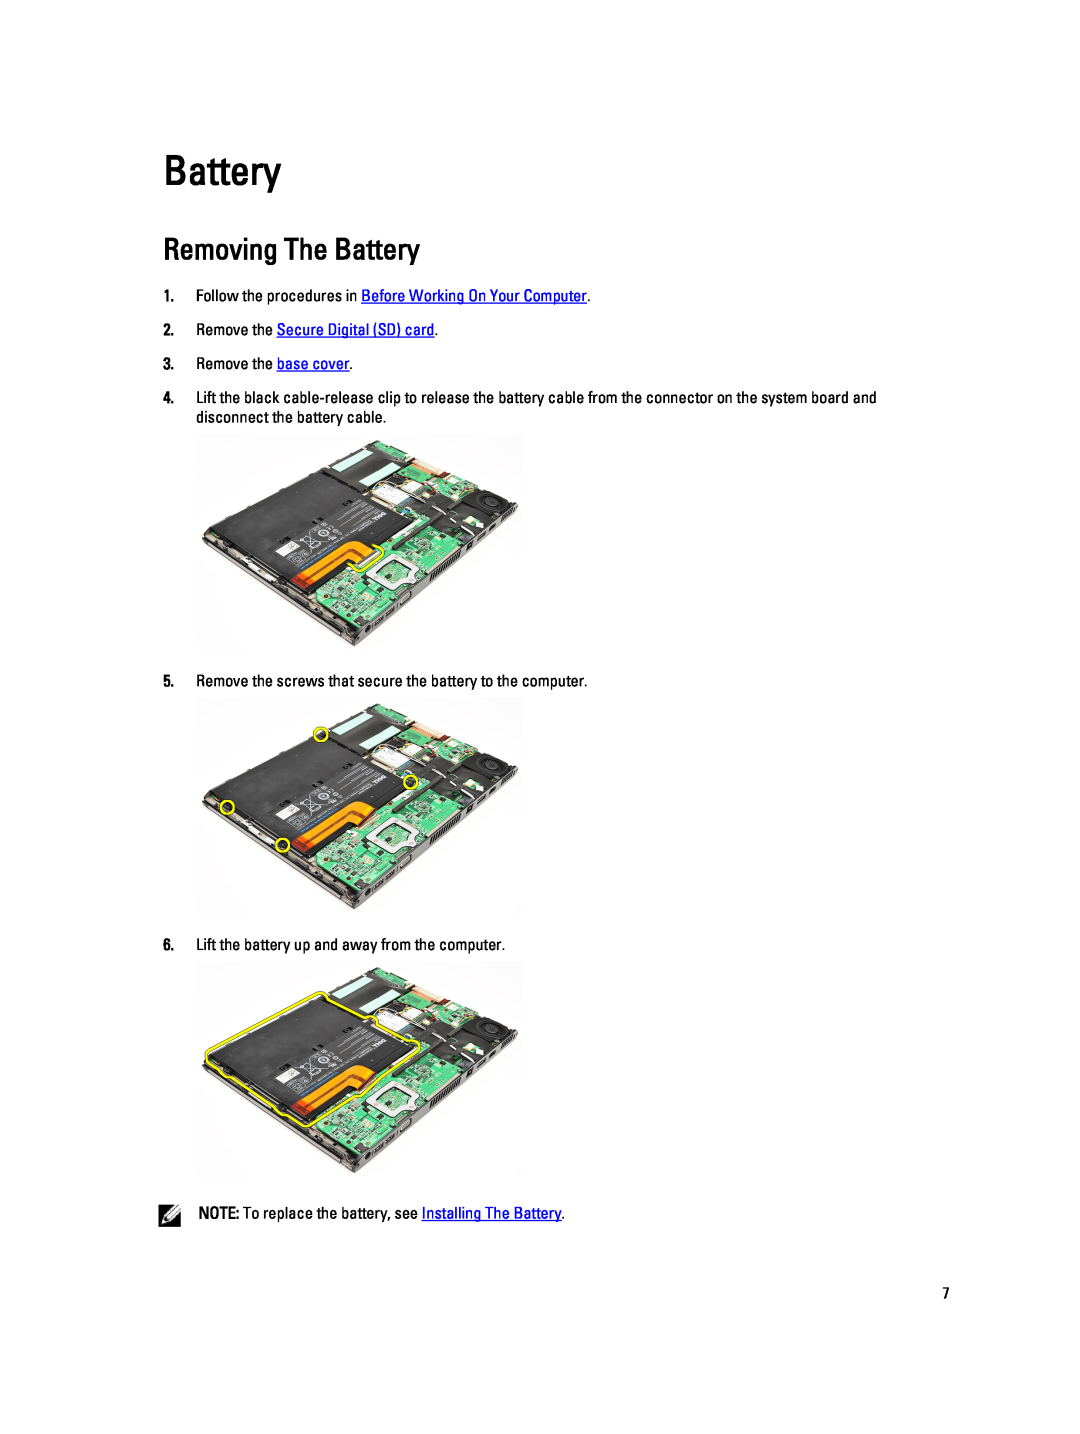 Dell V130 service manual Removing The Battery, Follow the procedures in Before Working On Your Computer 